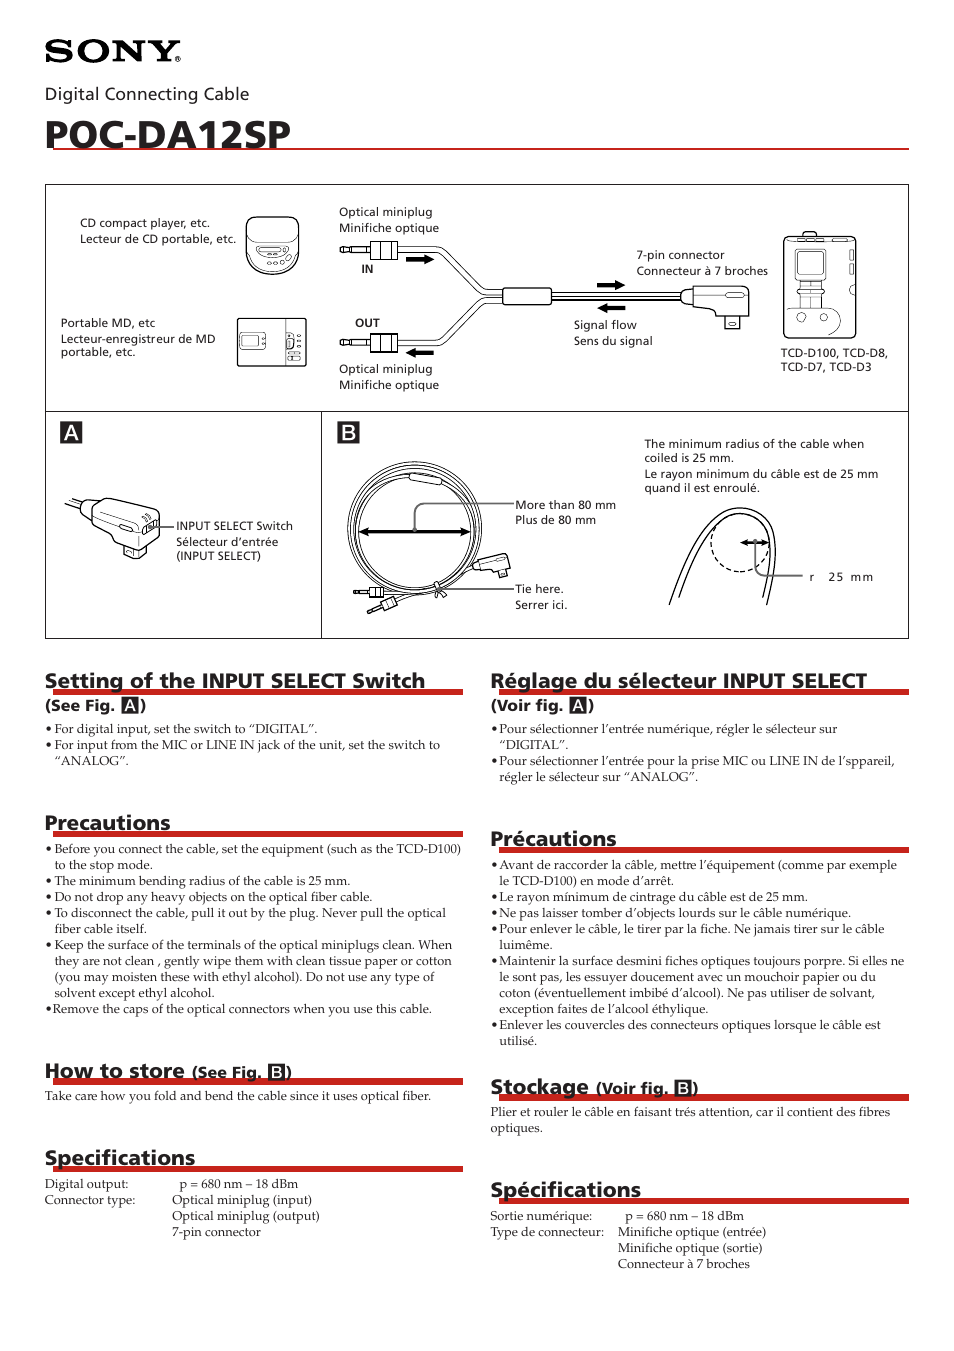 Sony POC-DA12SP User Manual | 2 pages